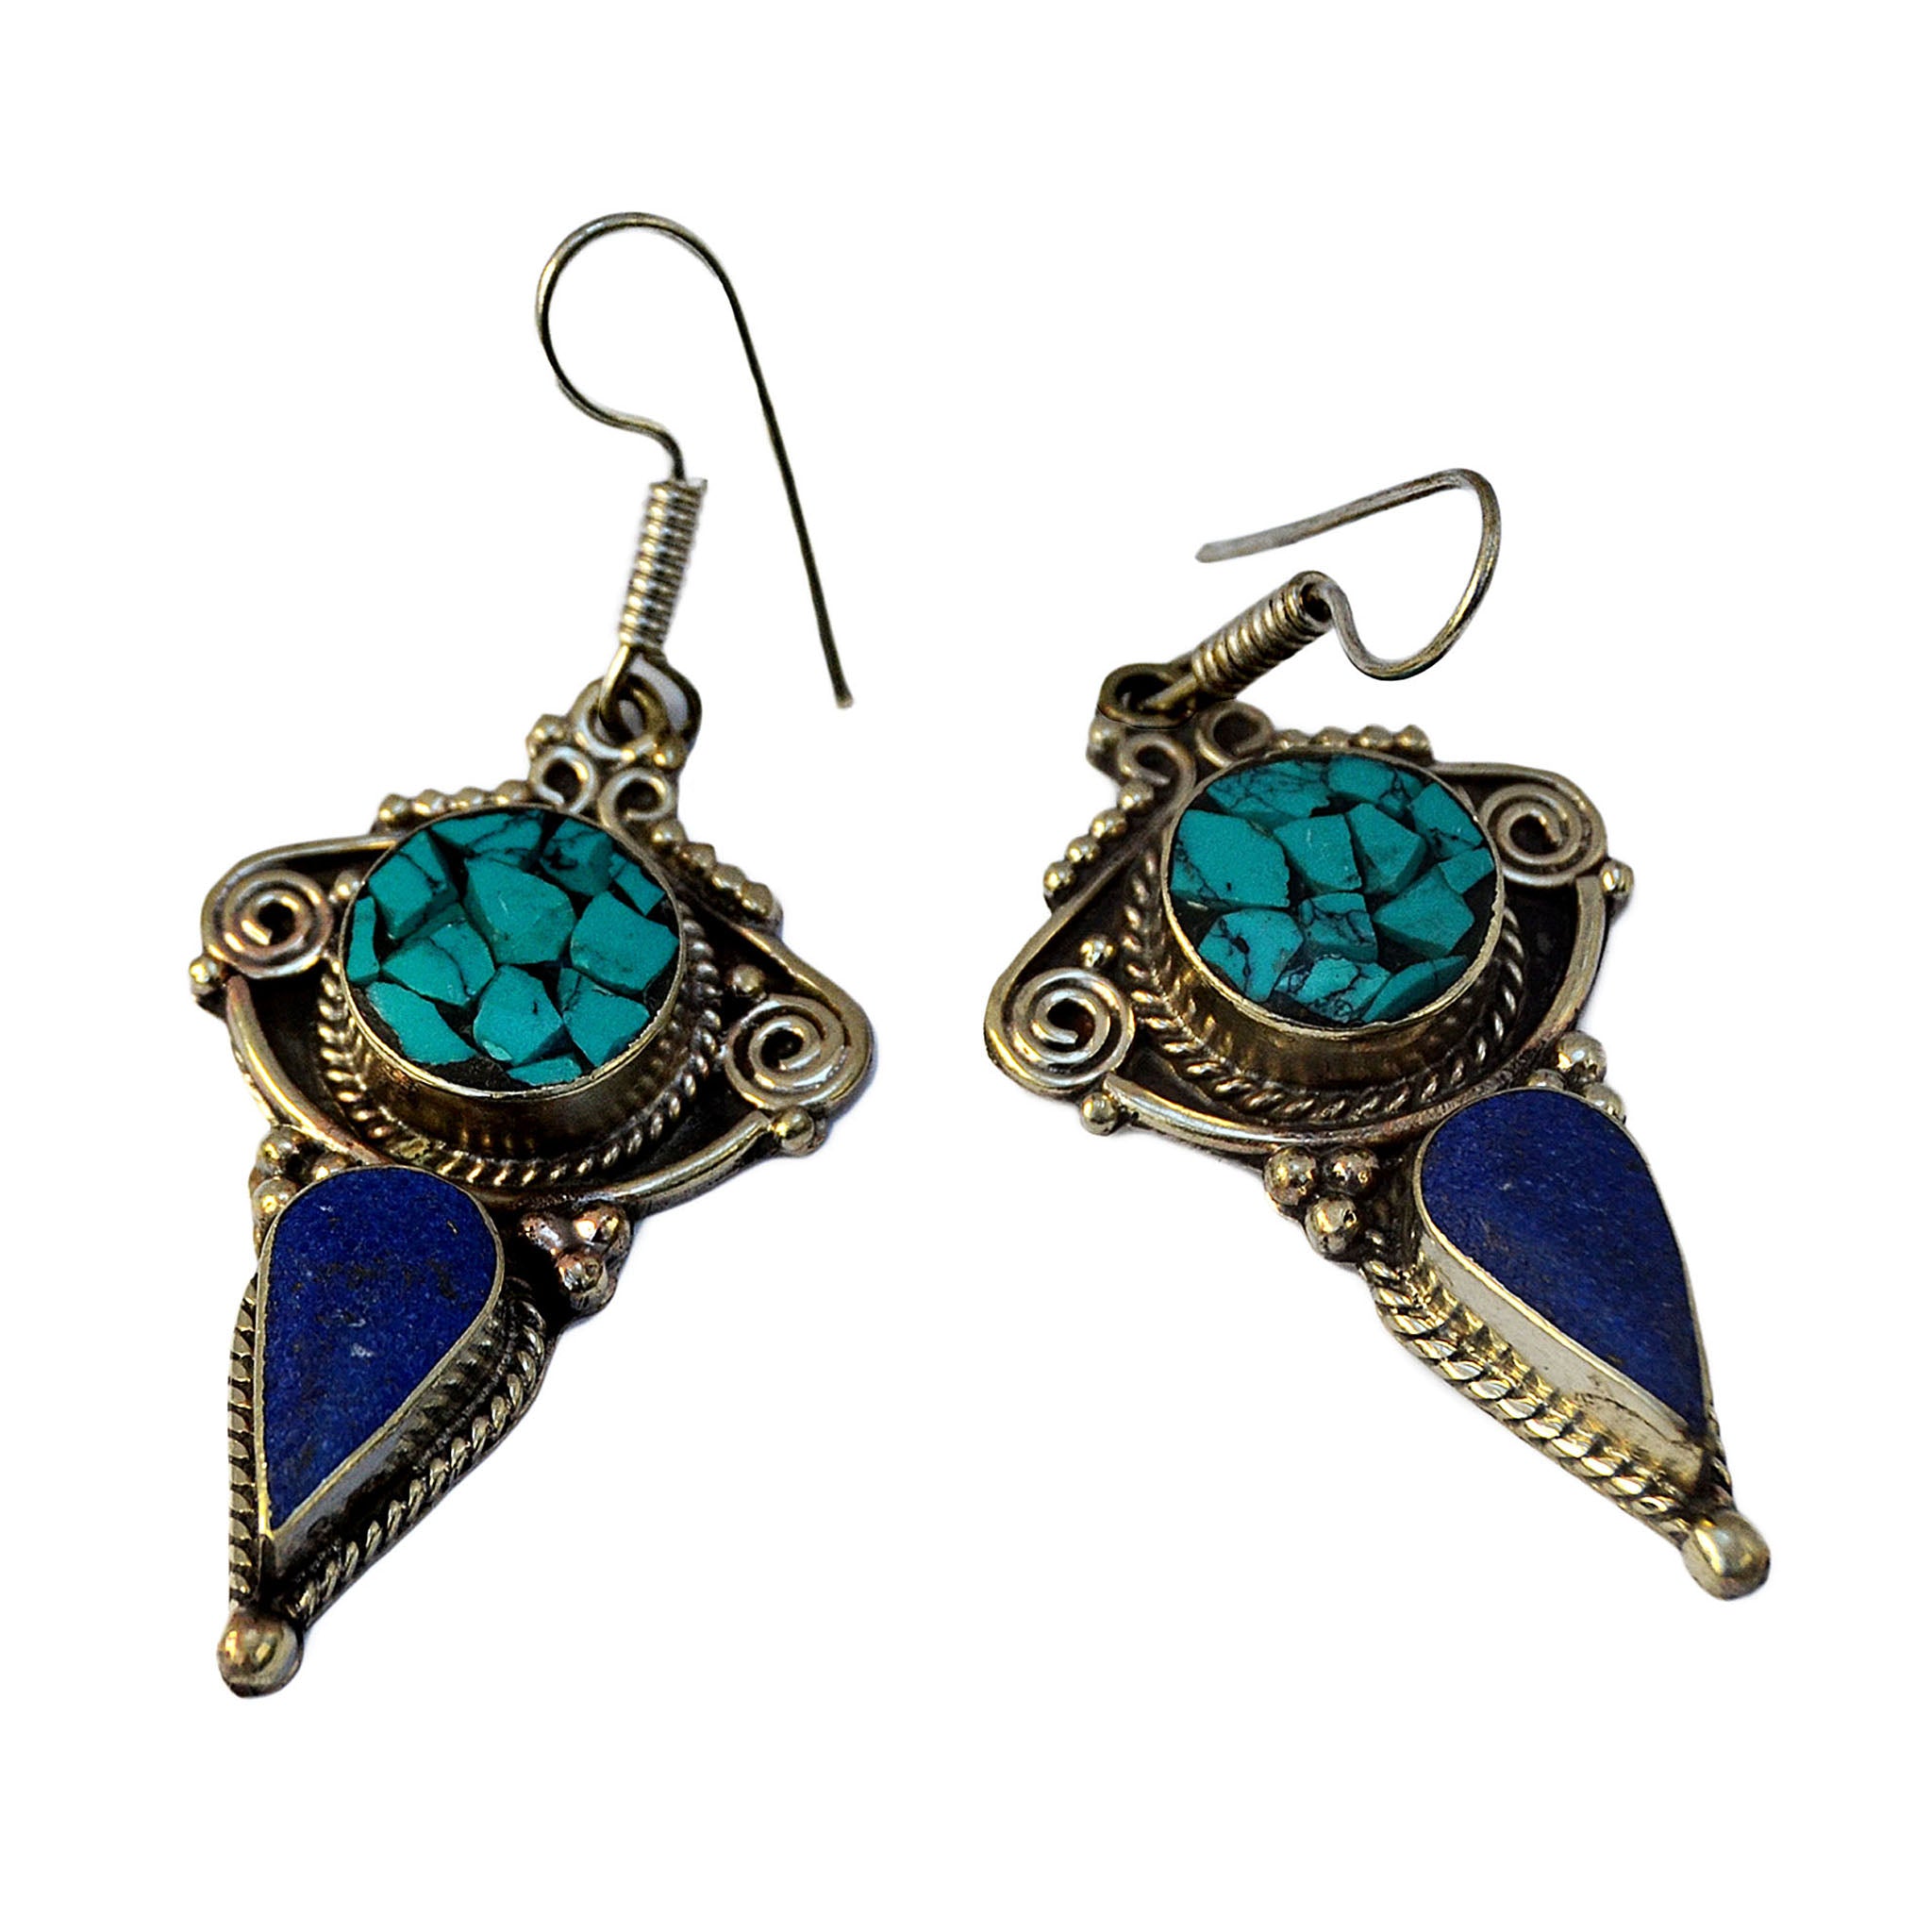 Nepal silver drop earrings with inlay turquoise and lapis lazuli stones on white background